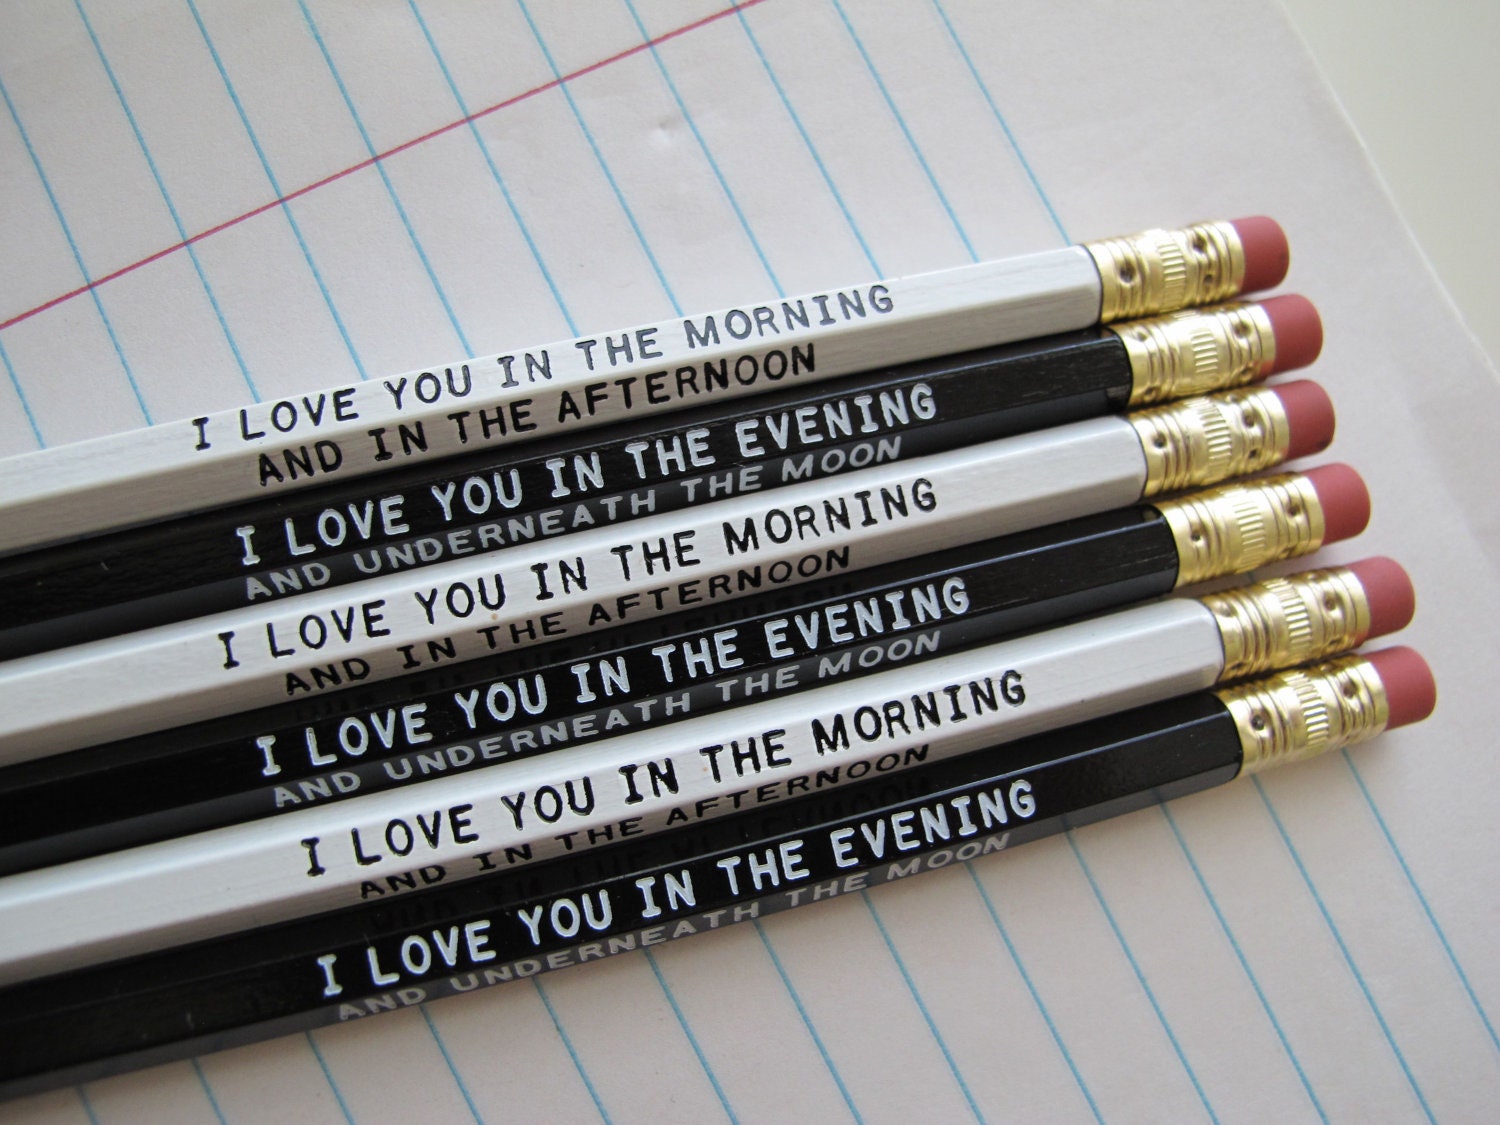 I Love You In The Morning And In The Afternoon I Love You In The Evening And Underneath The Moon Pencils